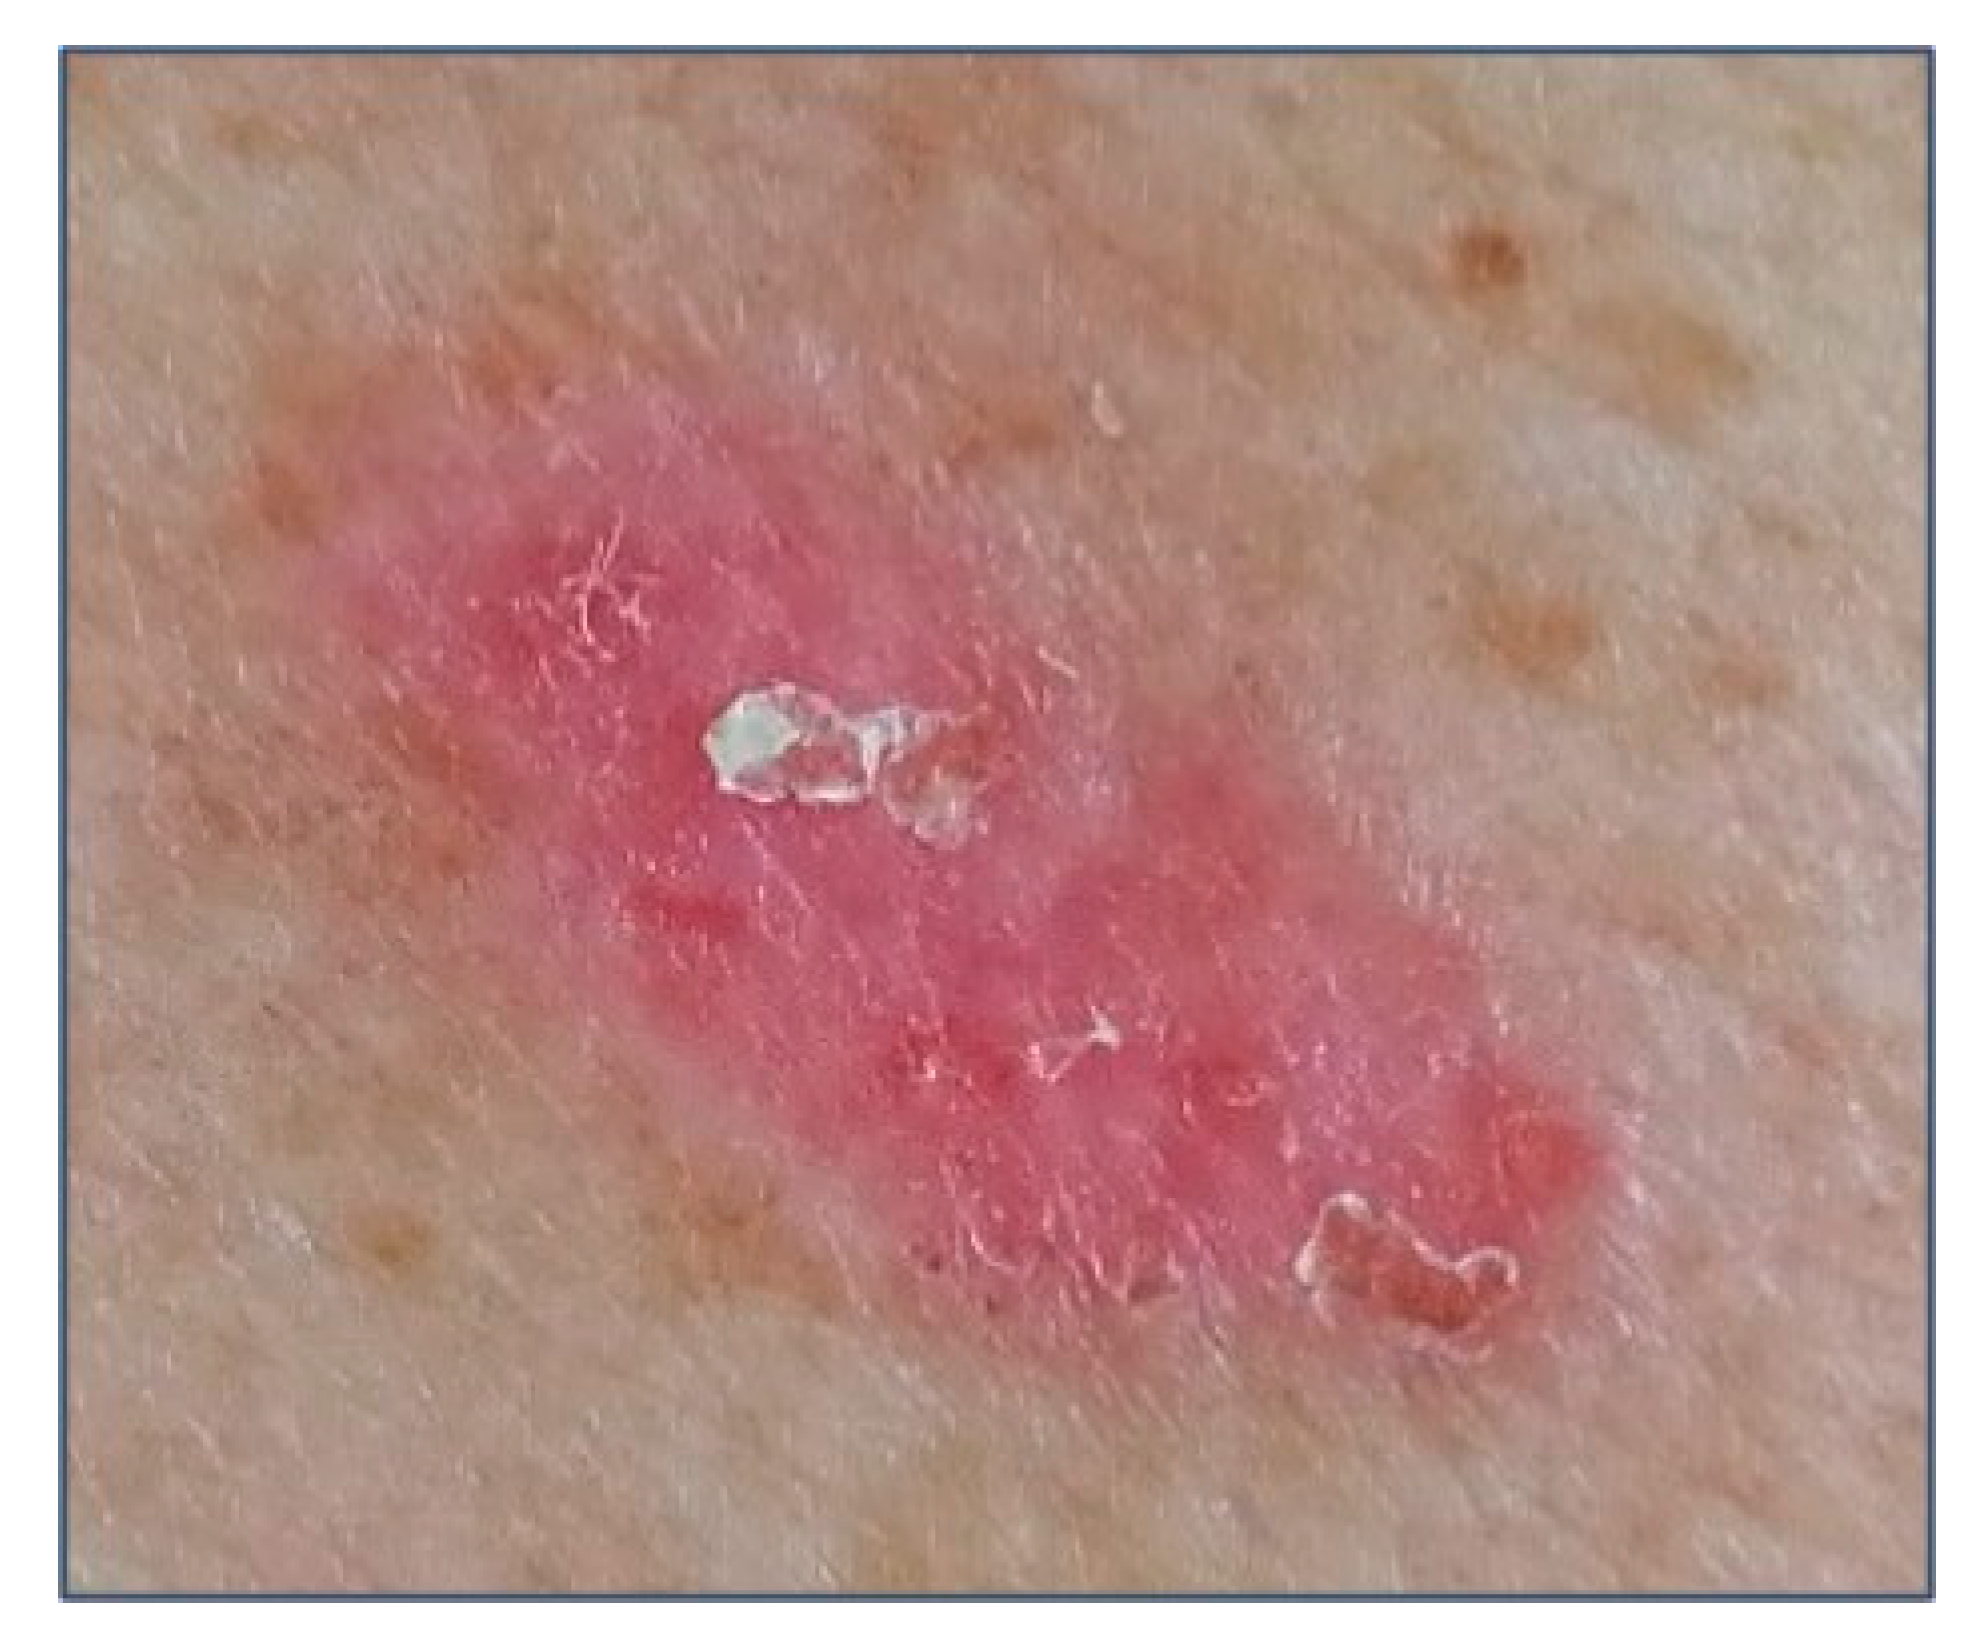 superficial basal cell carcinoma early stages